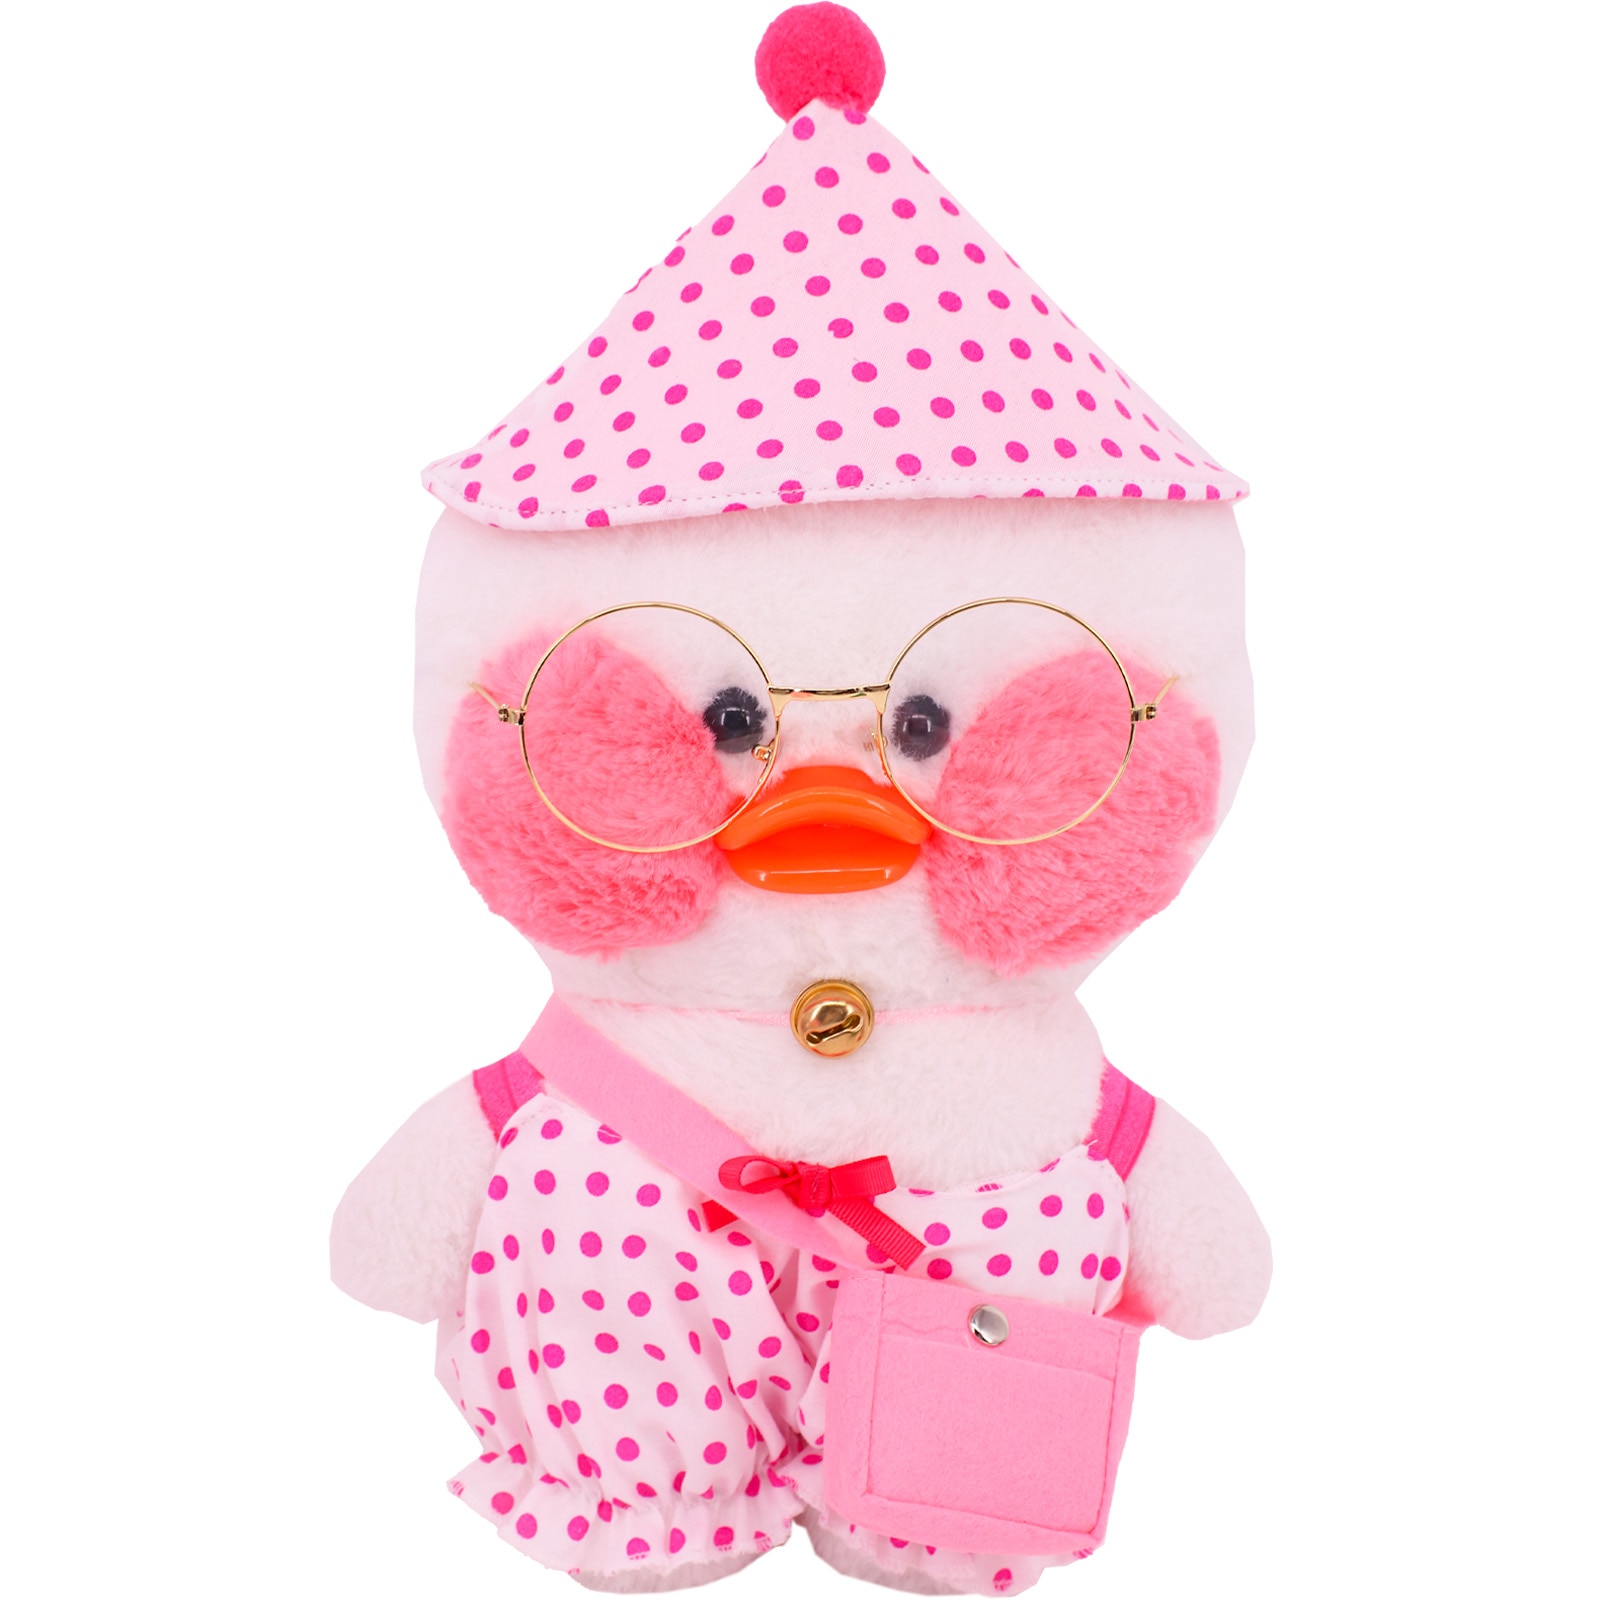 Kawaii Pink Duck Clothes Accessories lalafanfan Clothes Hat Skirt for 30 Cm Pink Duck Animal Plush 3 - Lalafanfan Shop